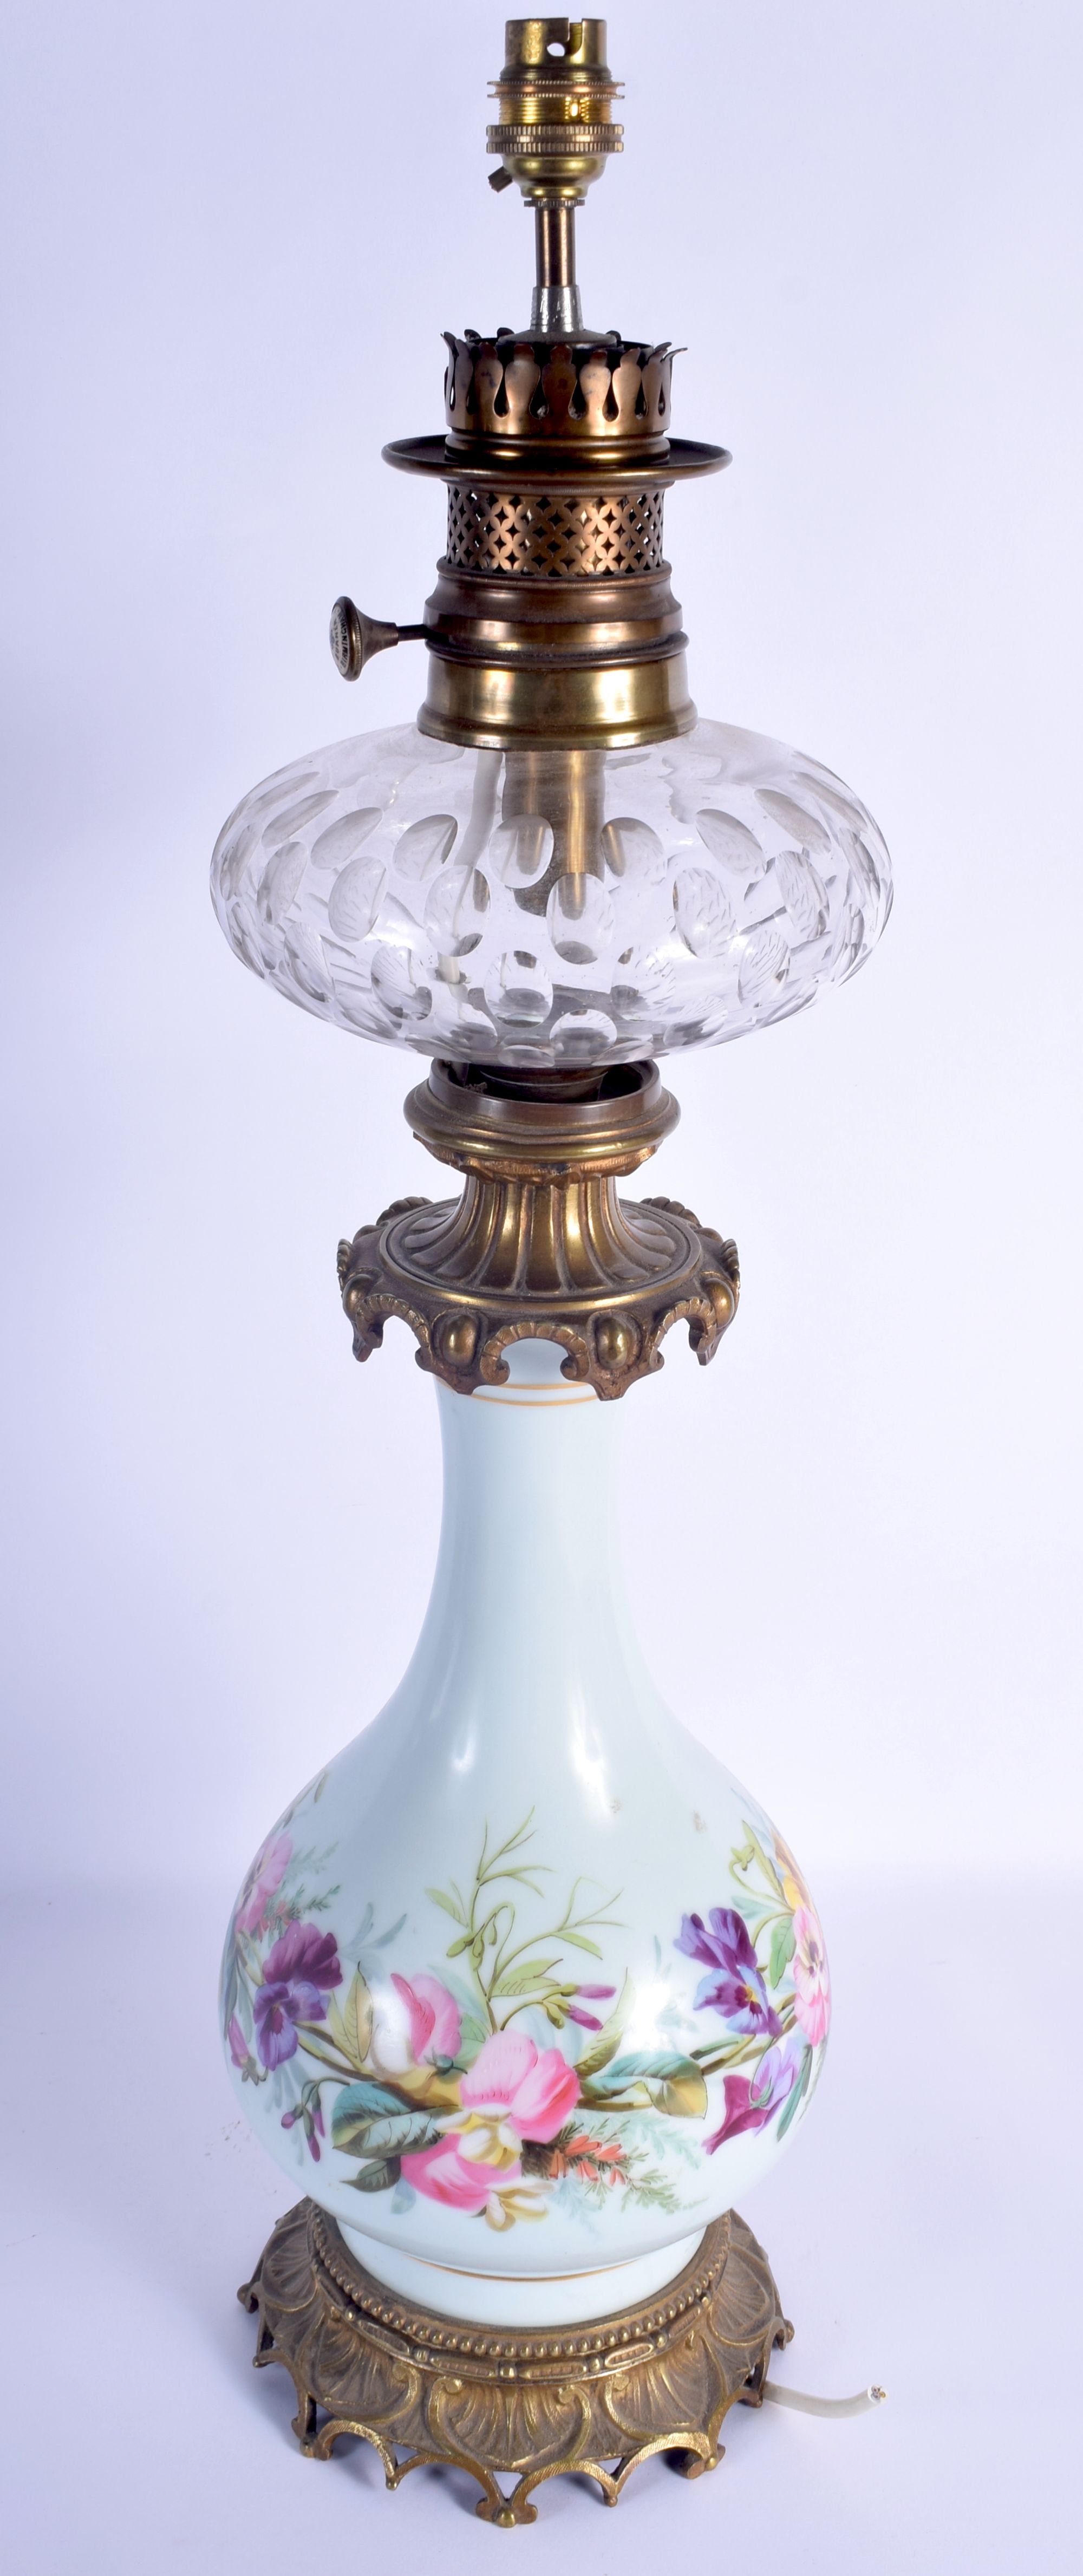 A LARGE 19TH CENTURY PAINTED OPALINE GLASS OIL LAMP decorated all over with foliage. 63 cm high. - Image 2 of 4